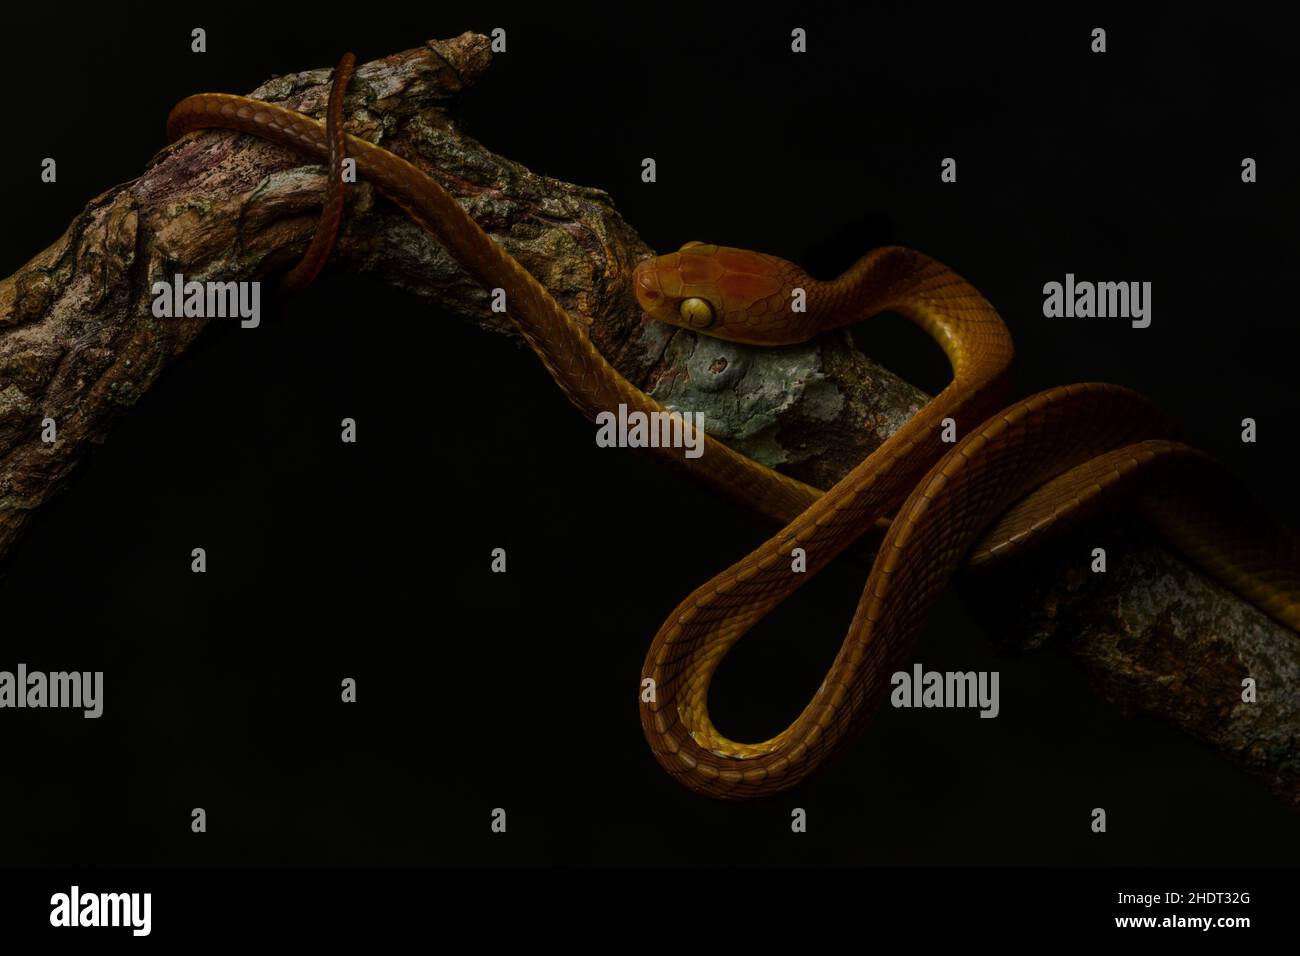 Portrait of a tawny cat snake from Assam against a black background. Stock Photo